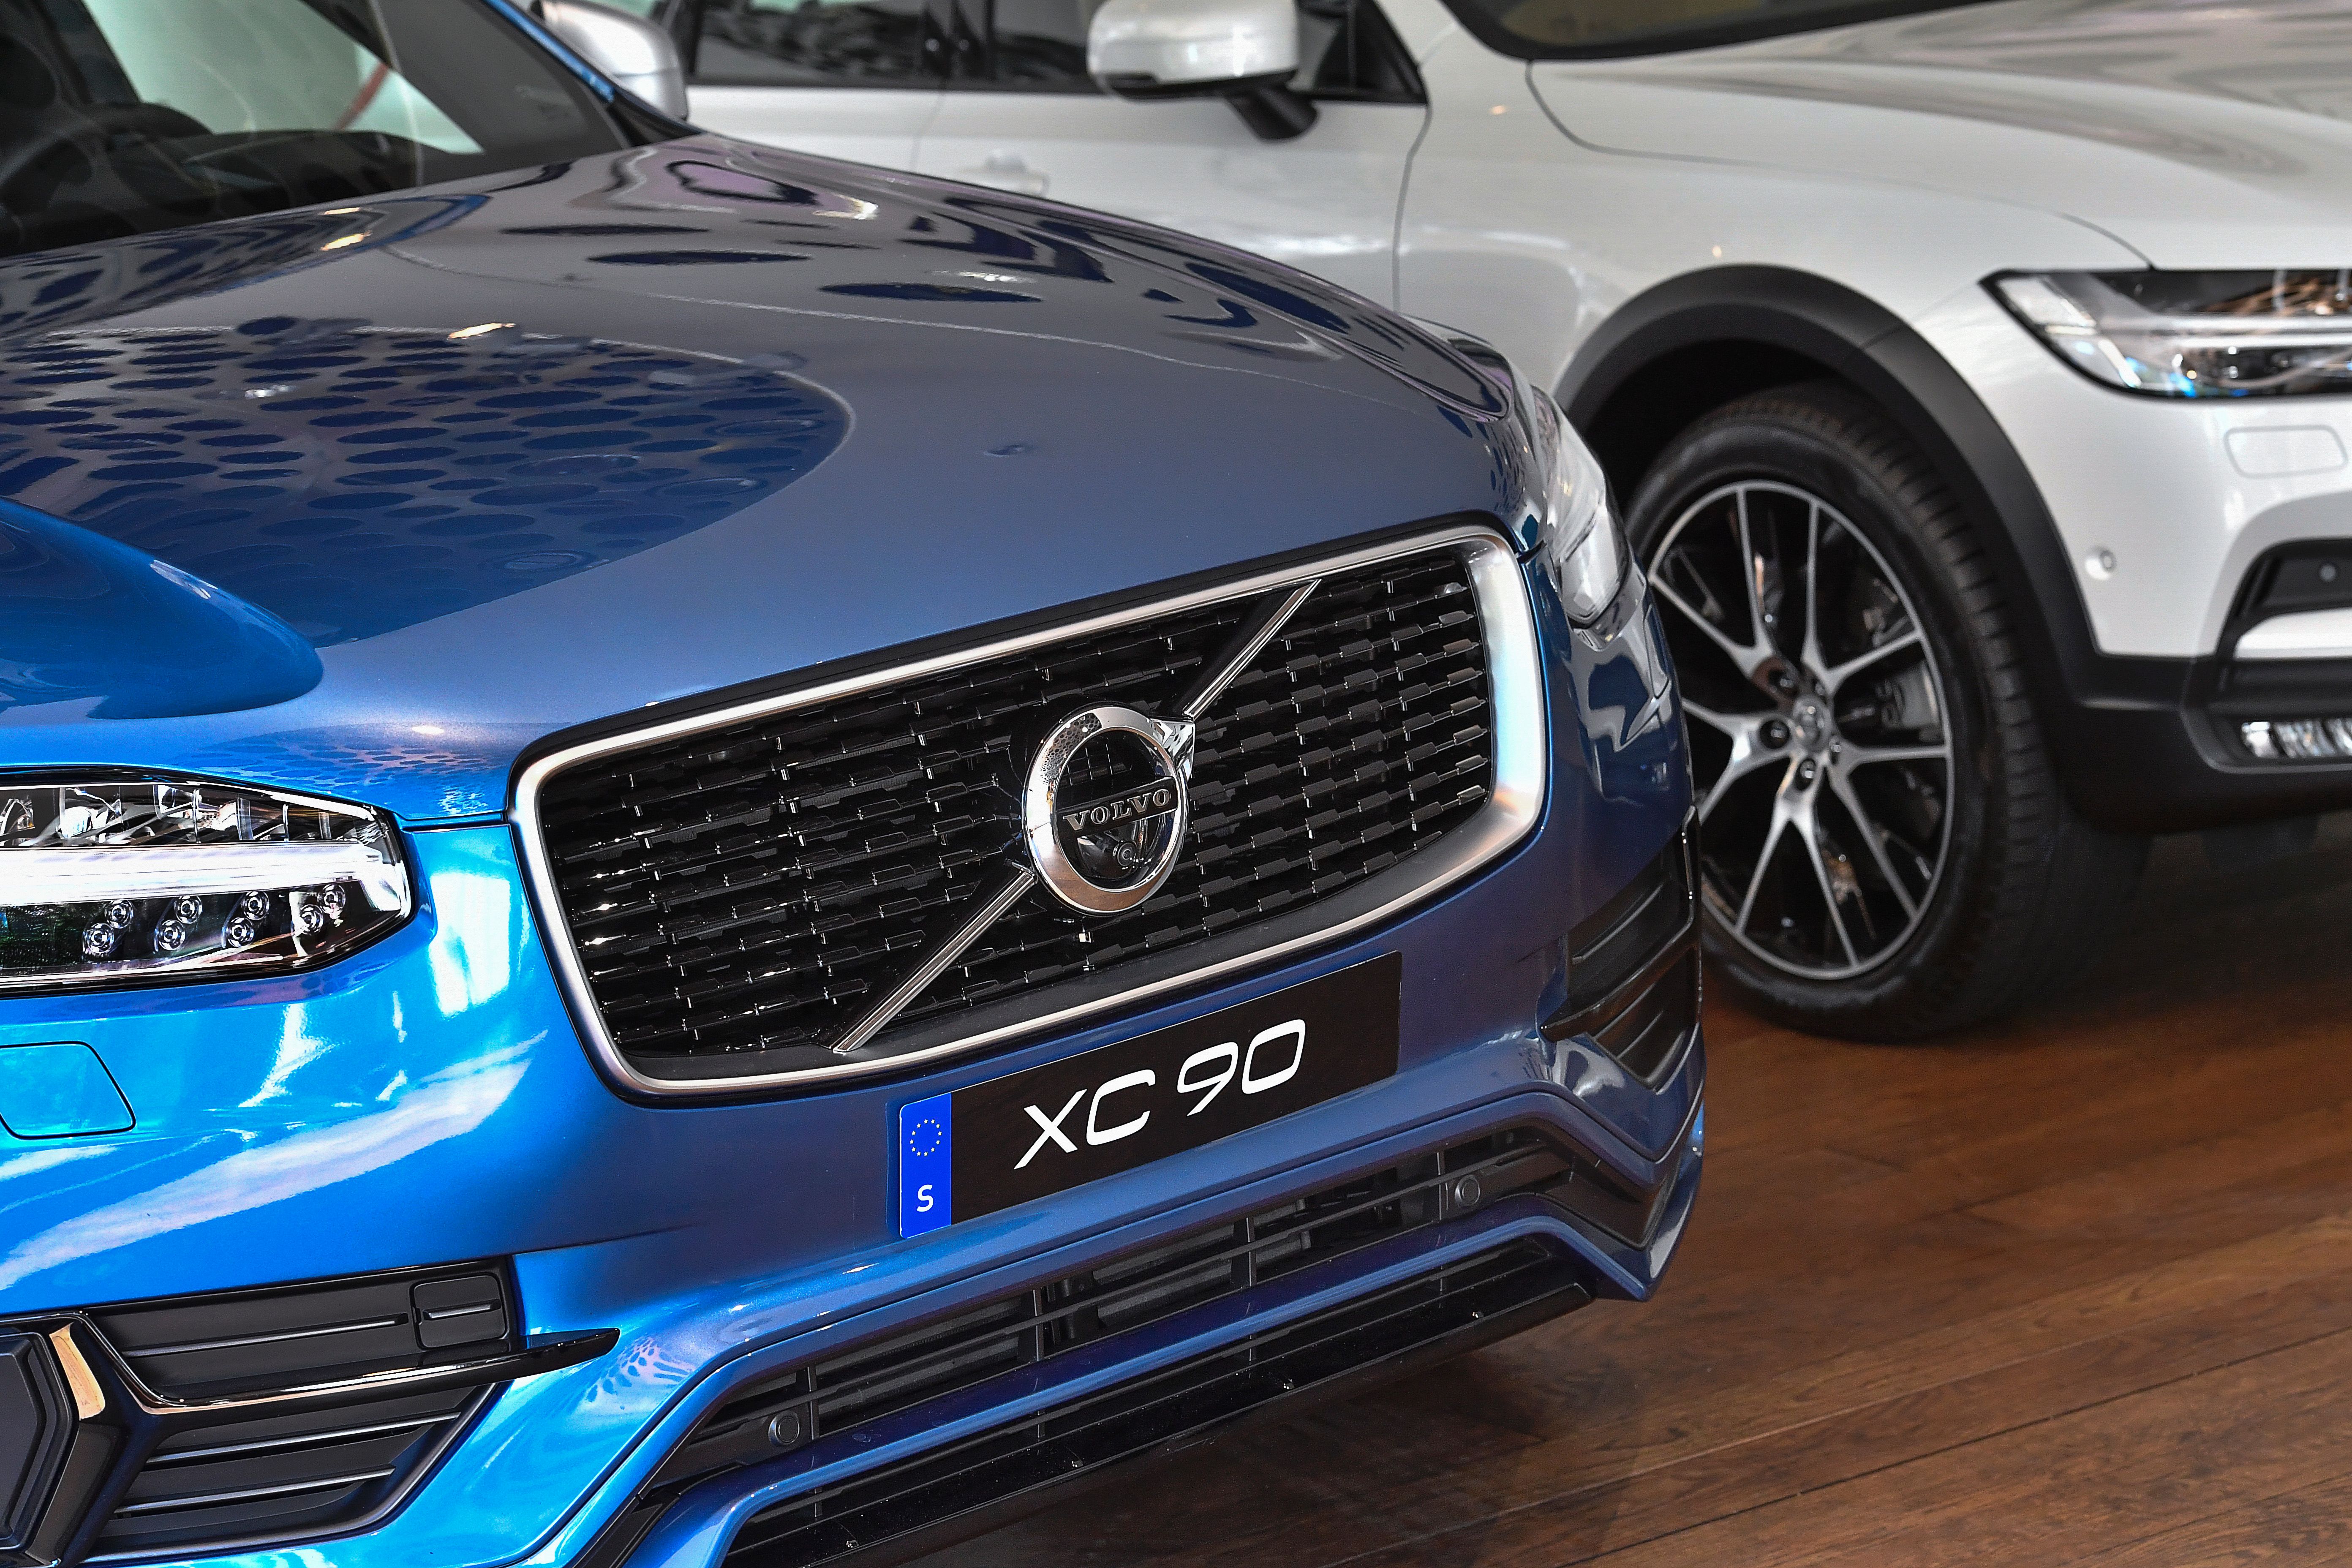 Volvo to Build Popular SUV in China - WSJ